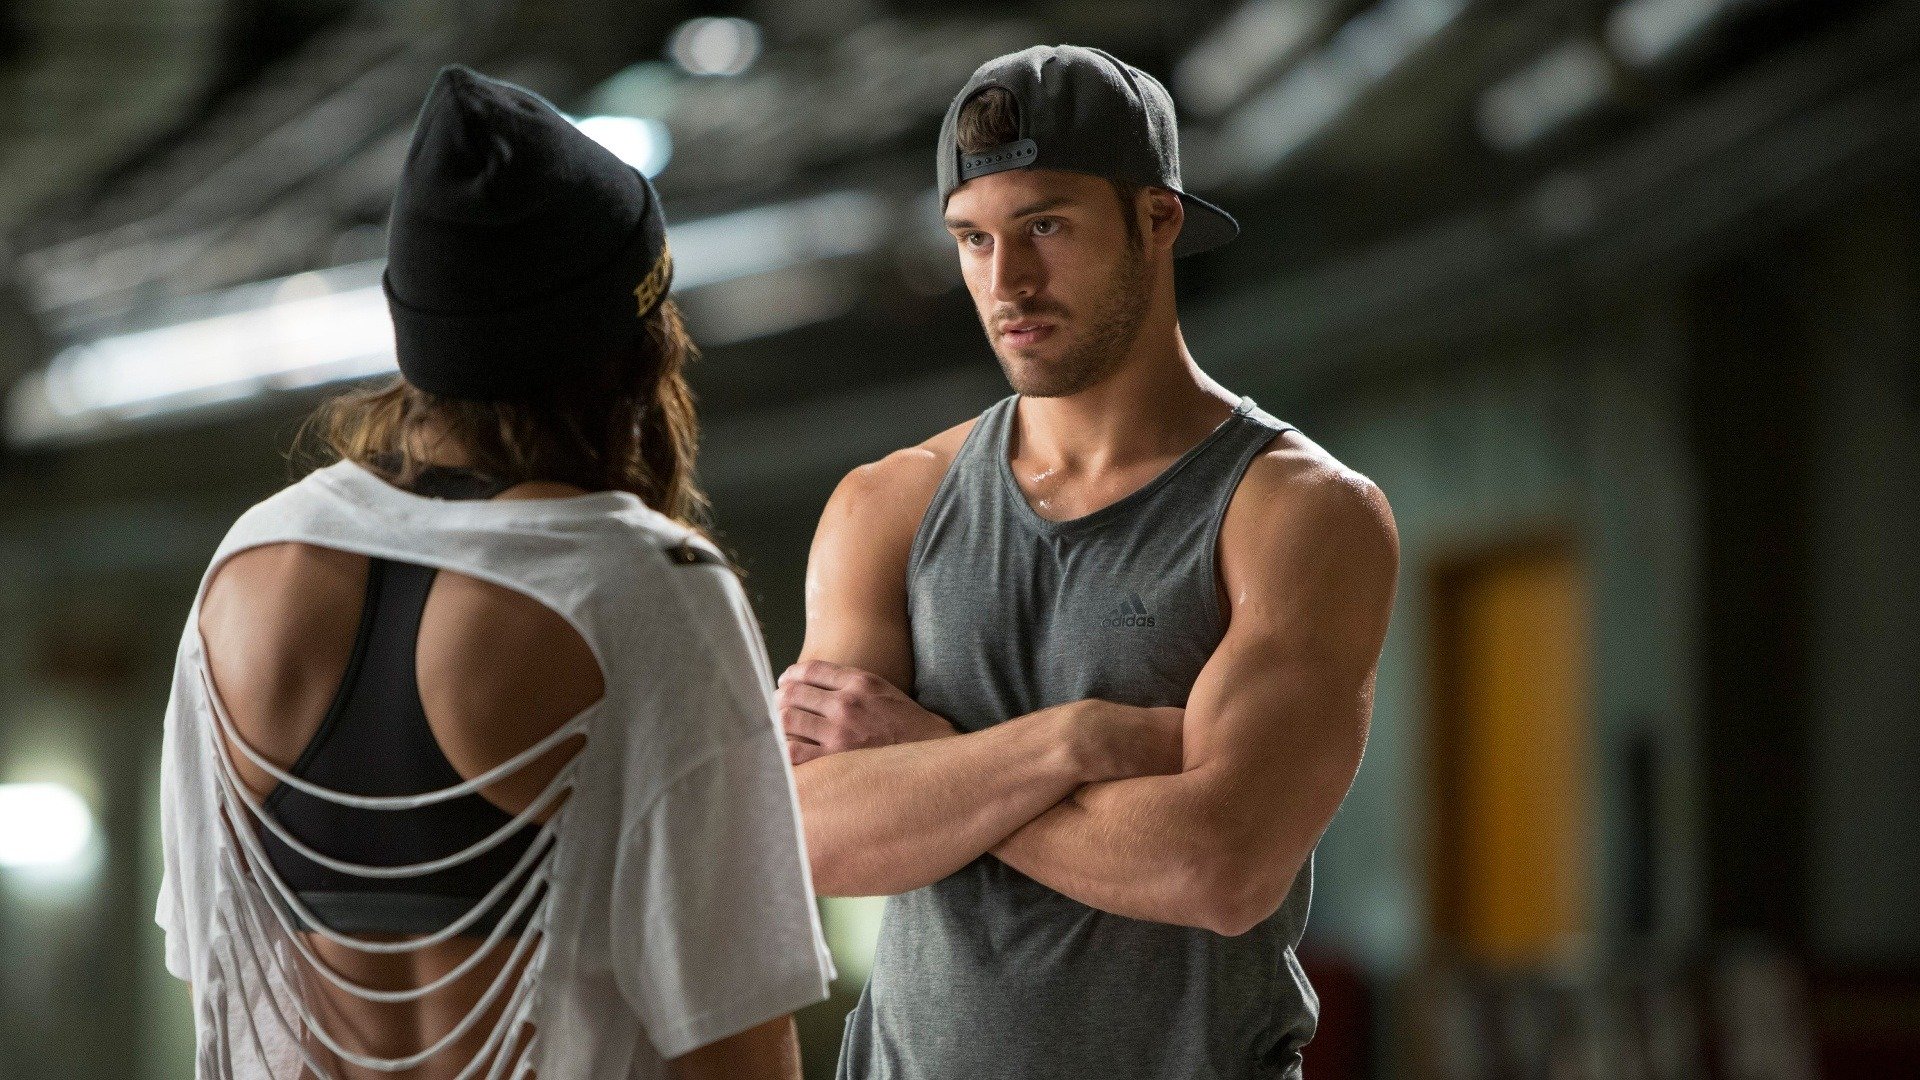 Step Up 5: All In